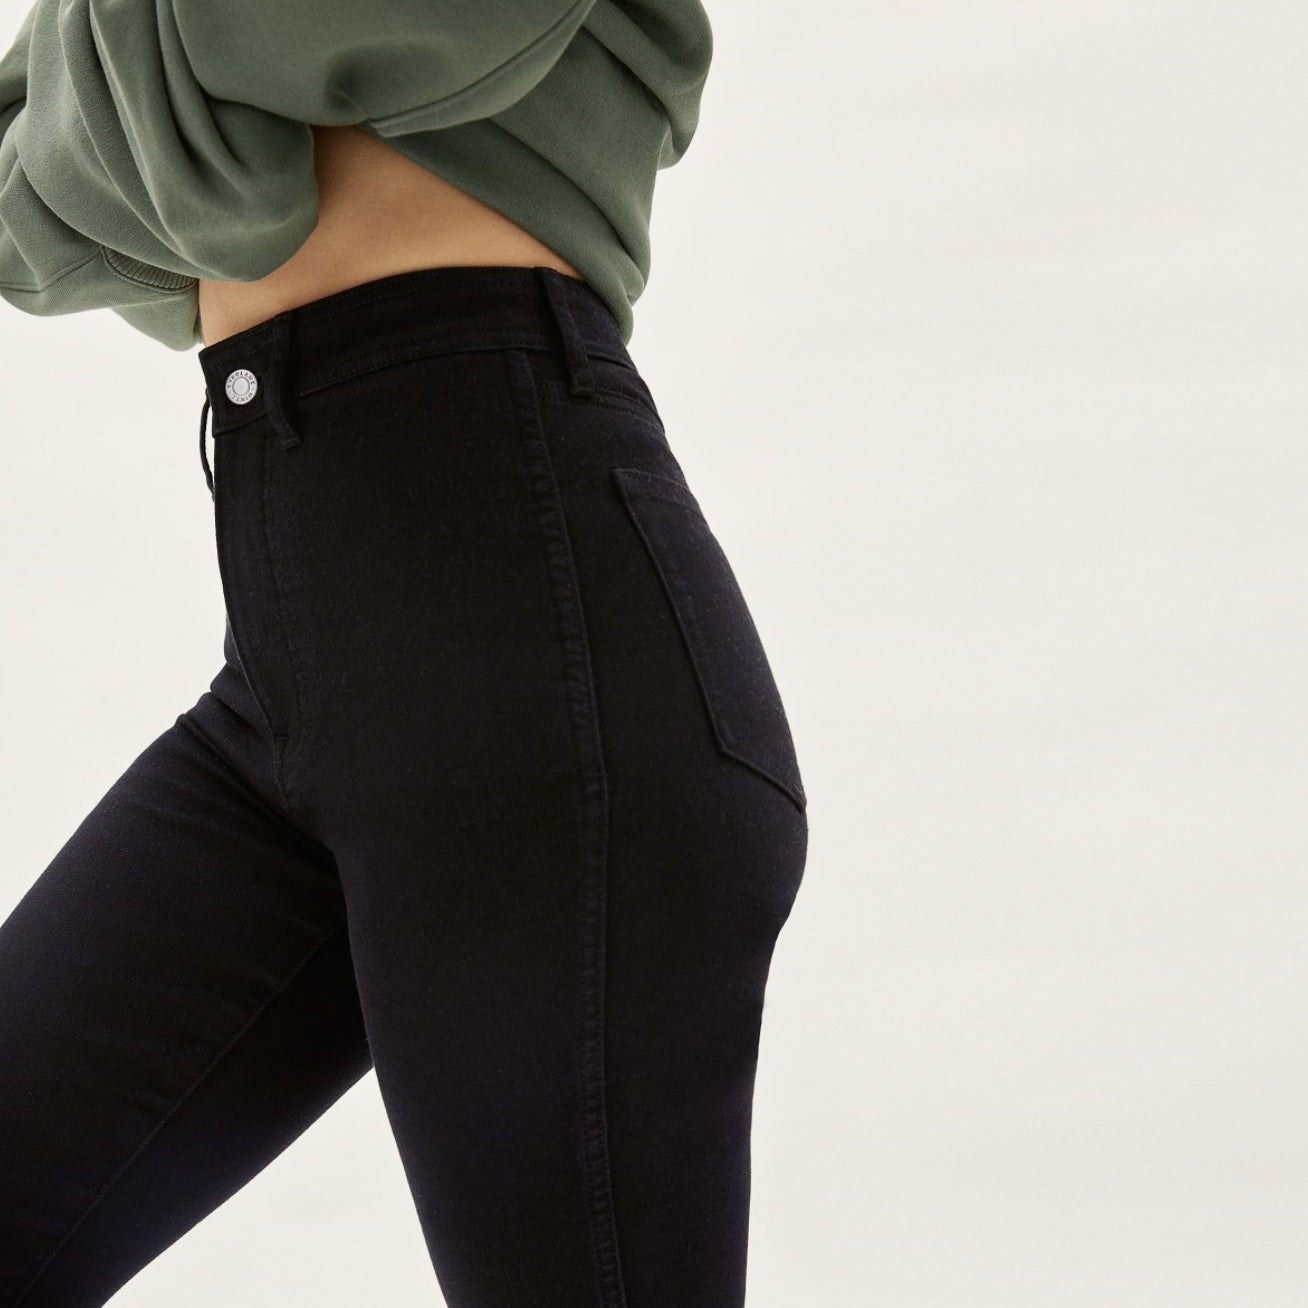 Close-up of model wearing the black high rise jeans